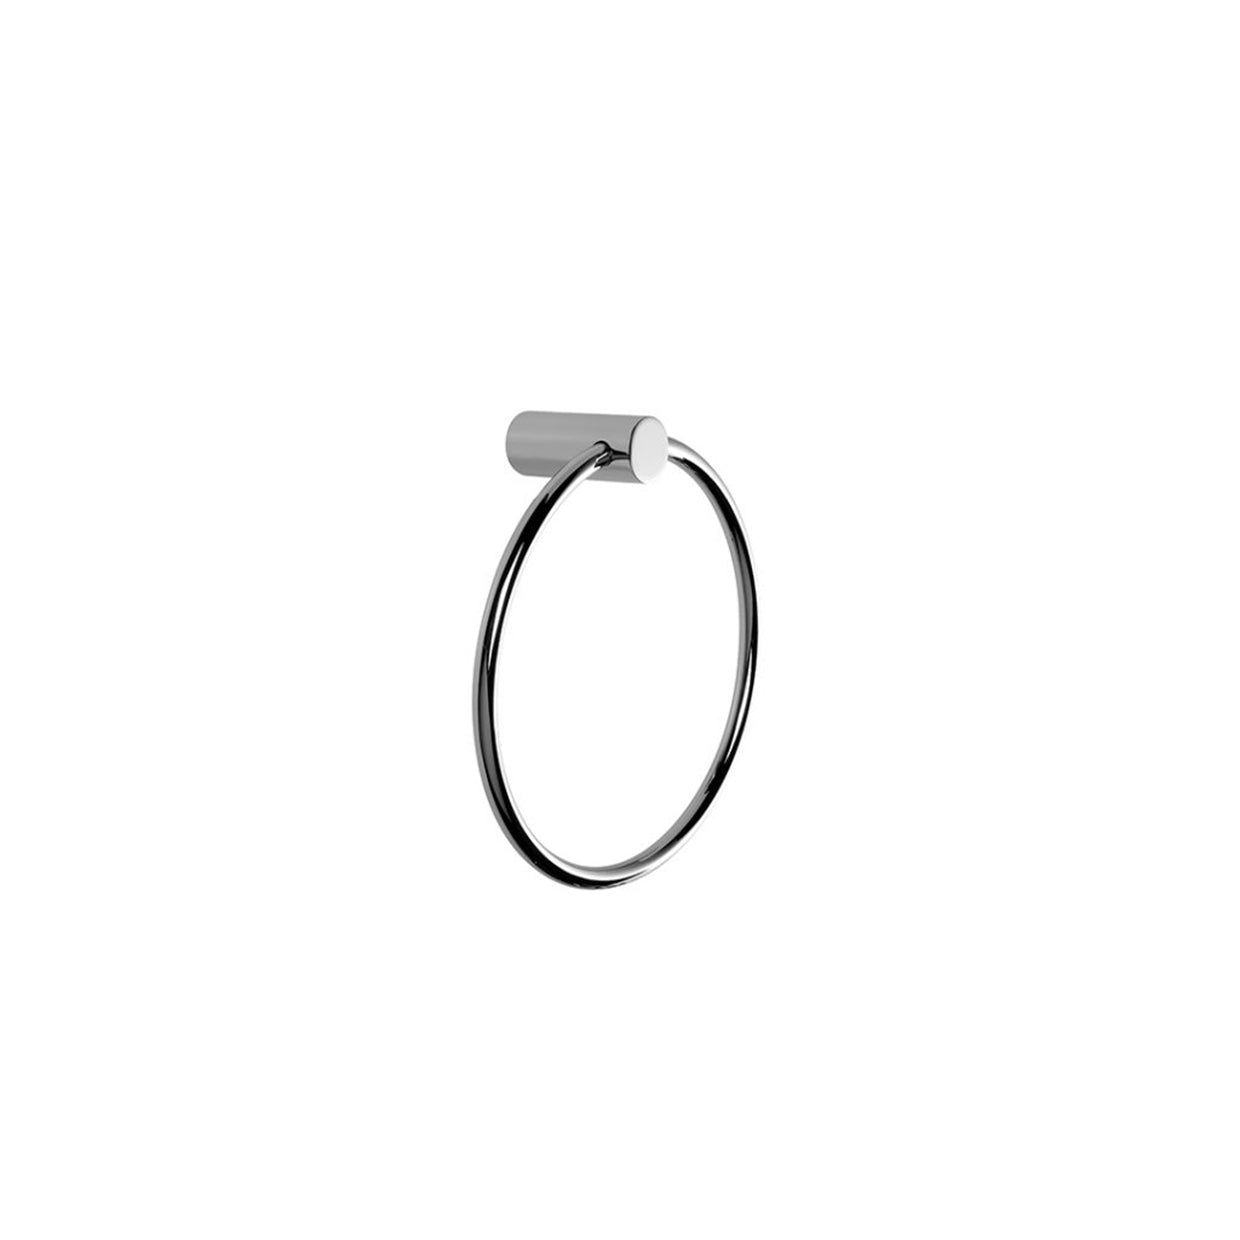 City Stik Towel Ring by Brodware - Just Bathroomware